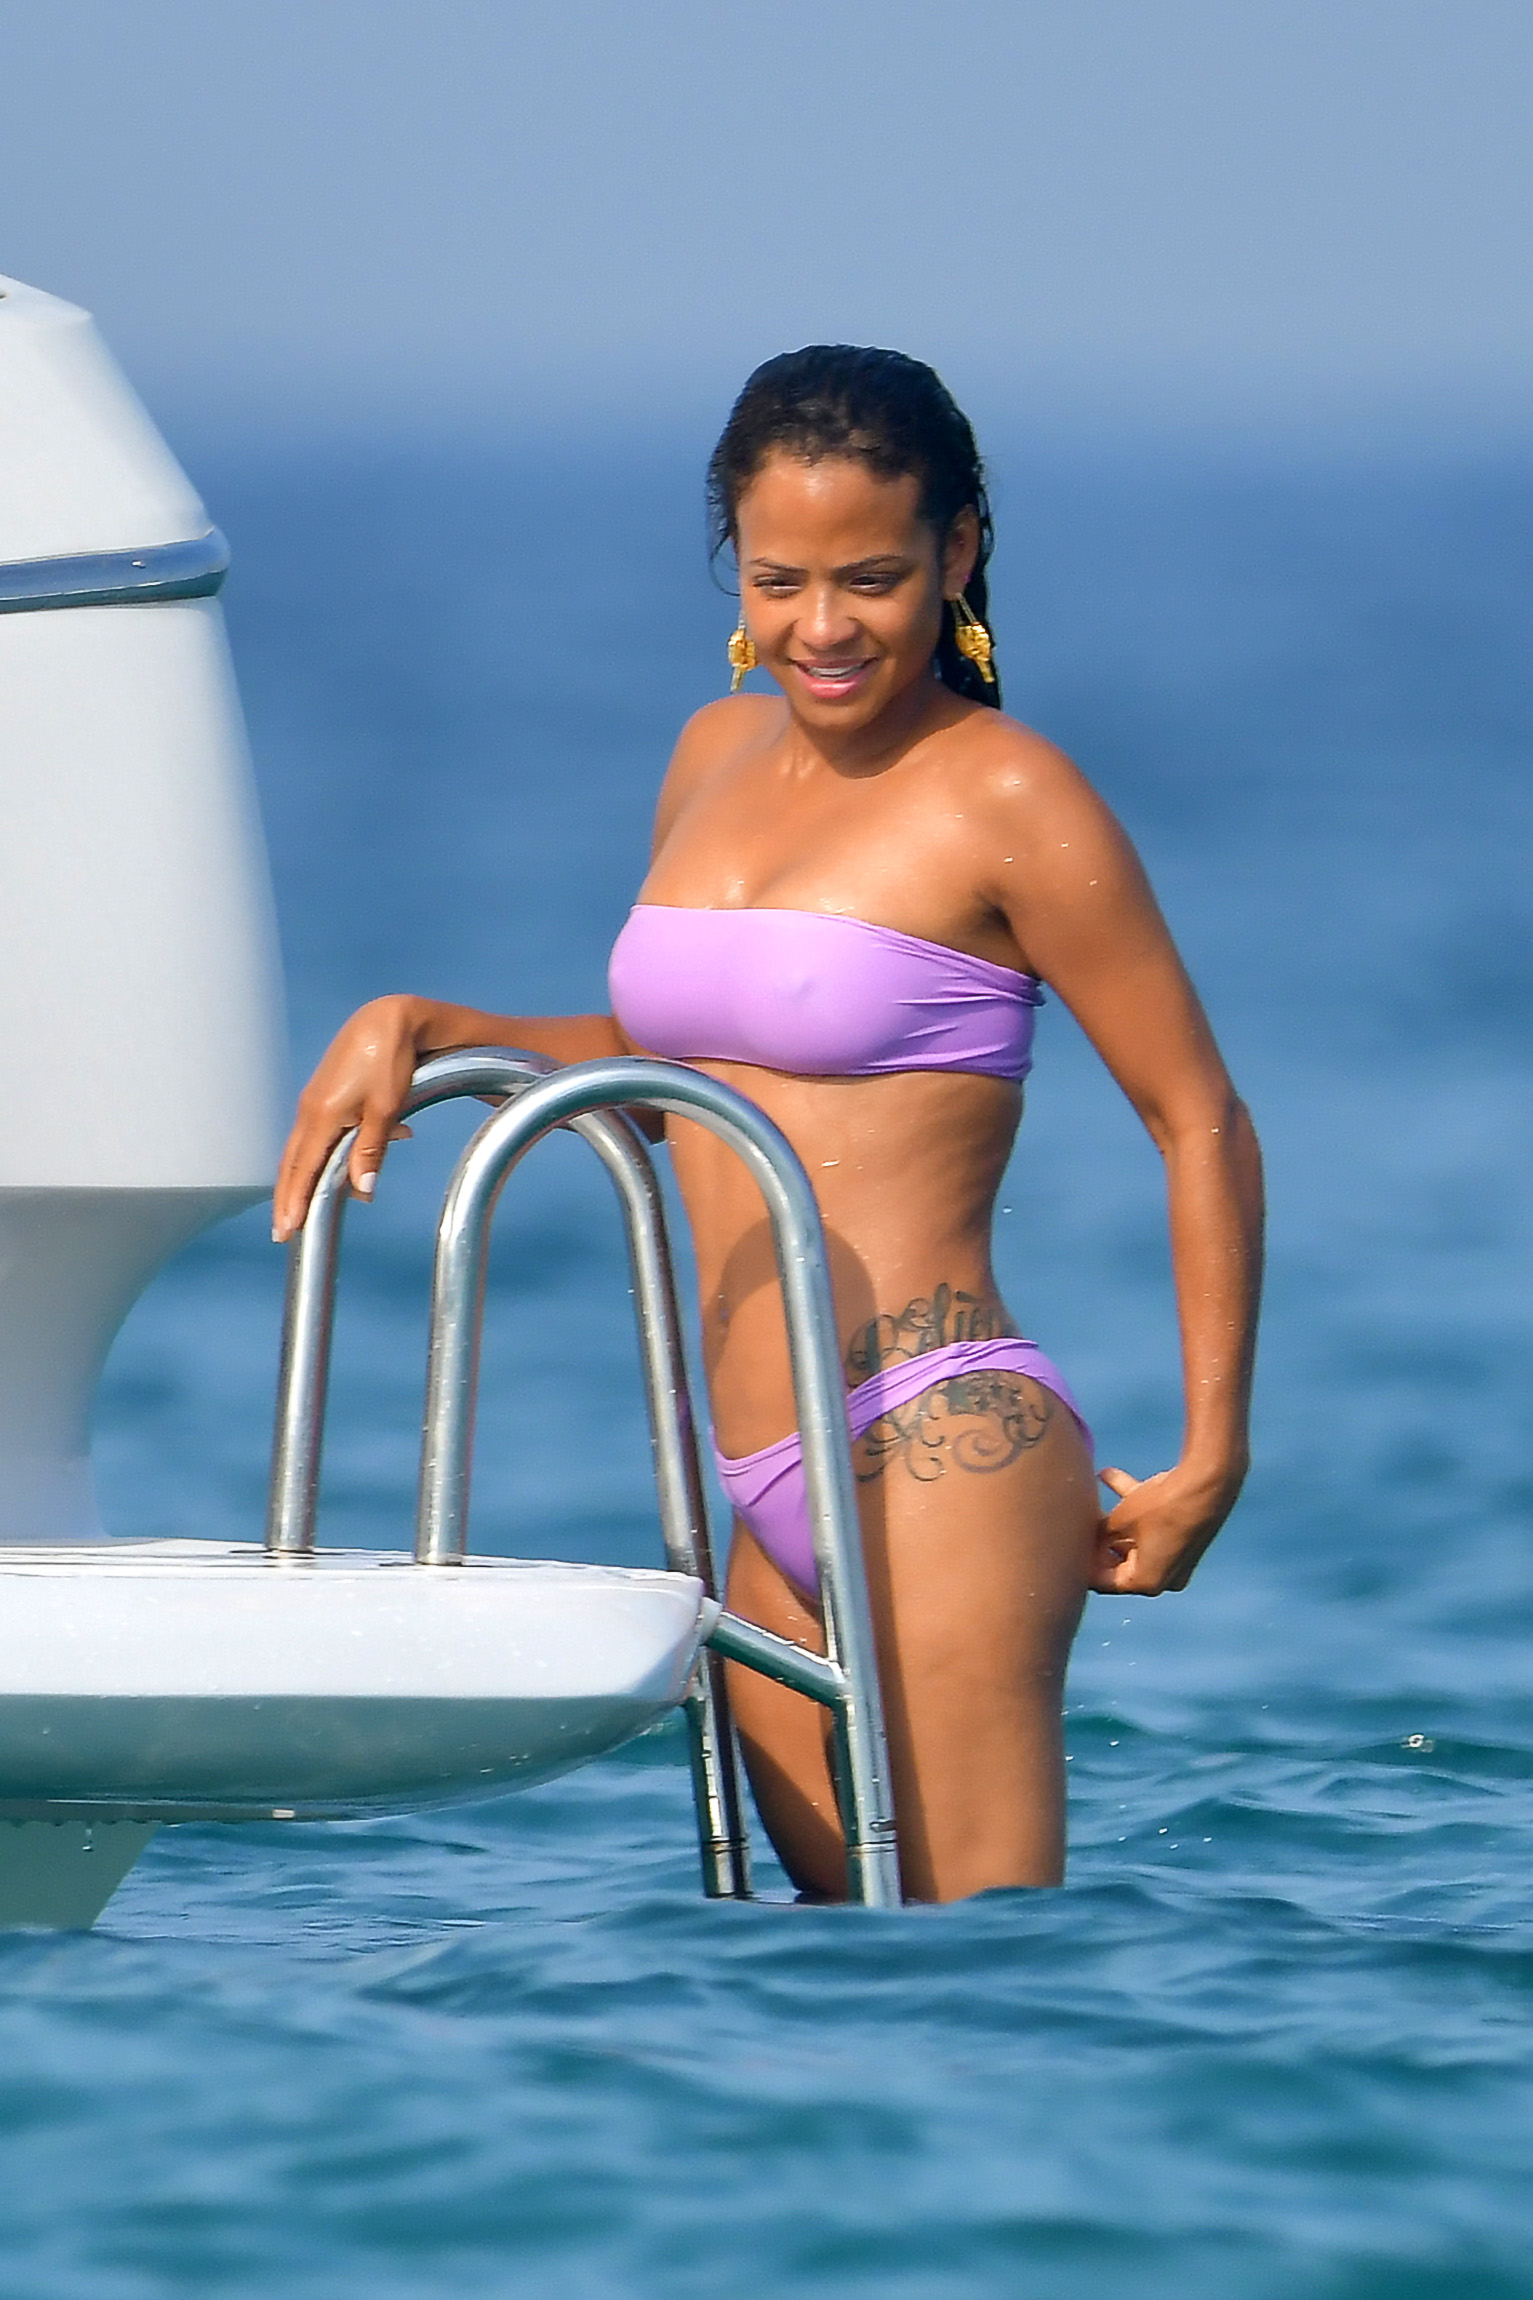 Christina Milian pokies and cameltoe in sexy bikini candids on a boat during holiday UHQ (35).jpg